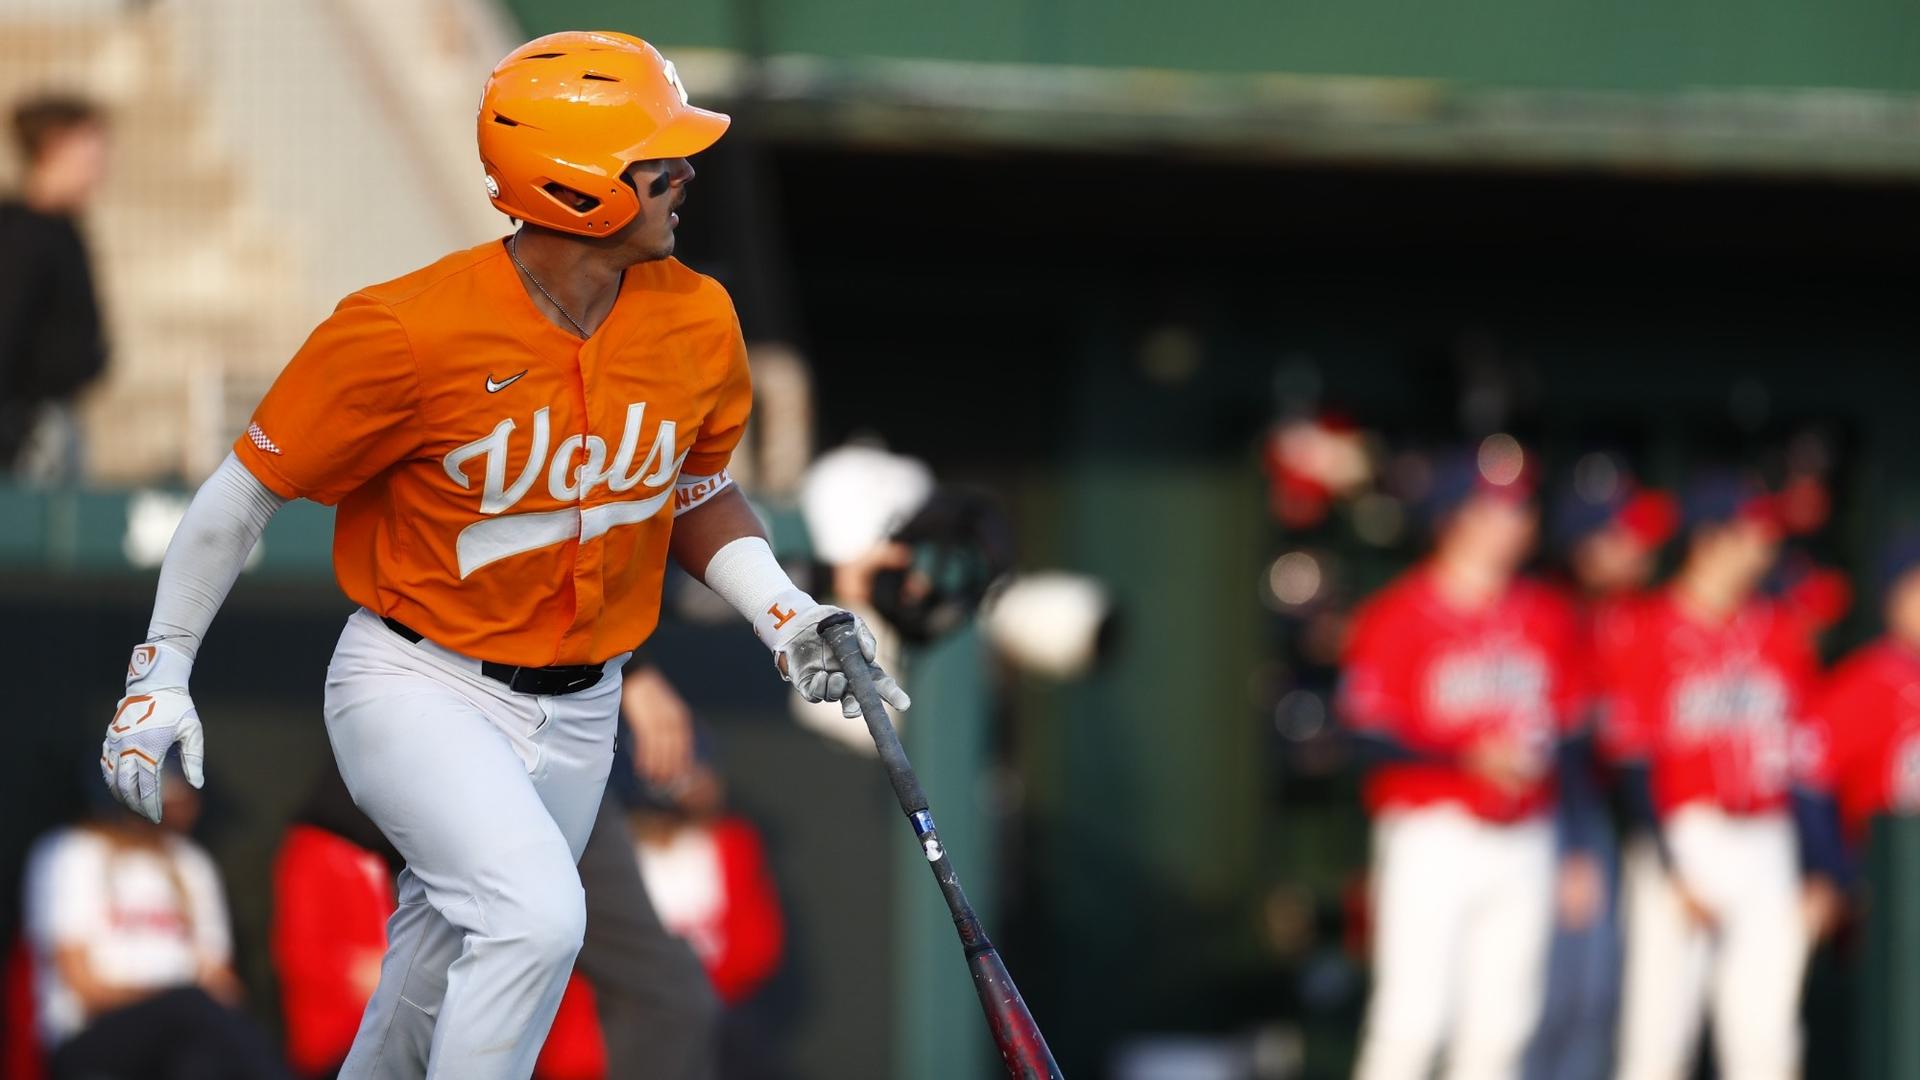 #7 Vols Fall in Back-and-Forth Affair Against #17 Rebels